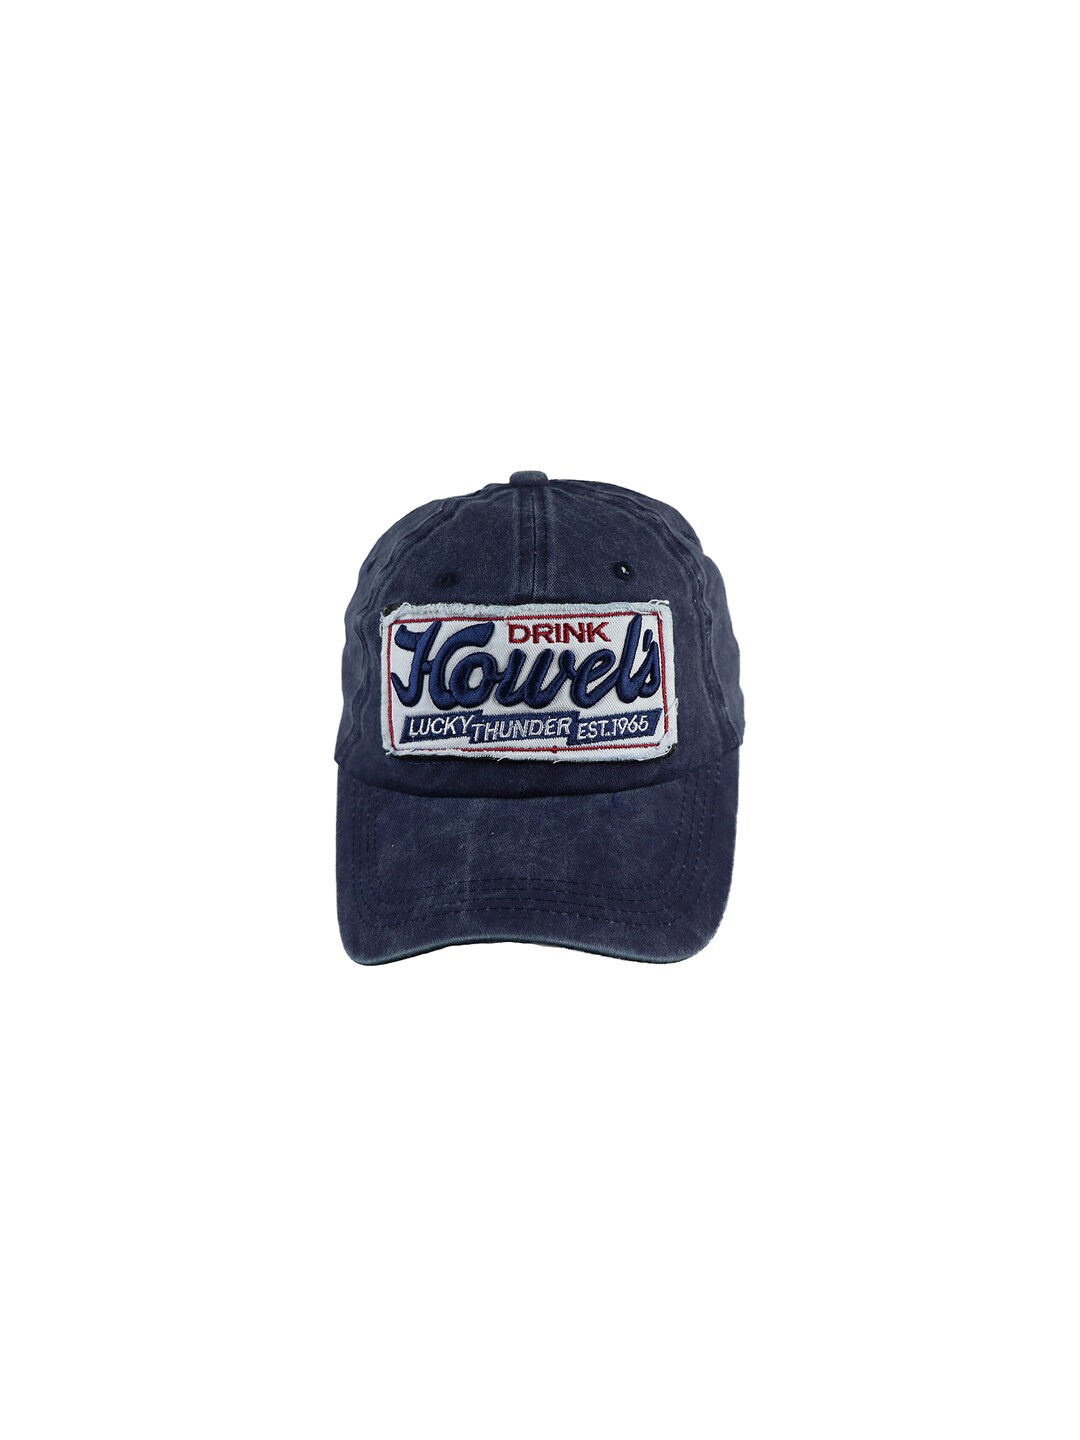 iSWEVEN Unisex Blue & White Embroidered Adjustable Snapback Cap Price in India